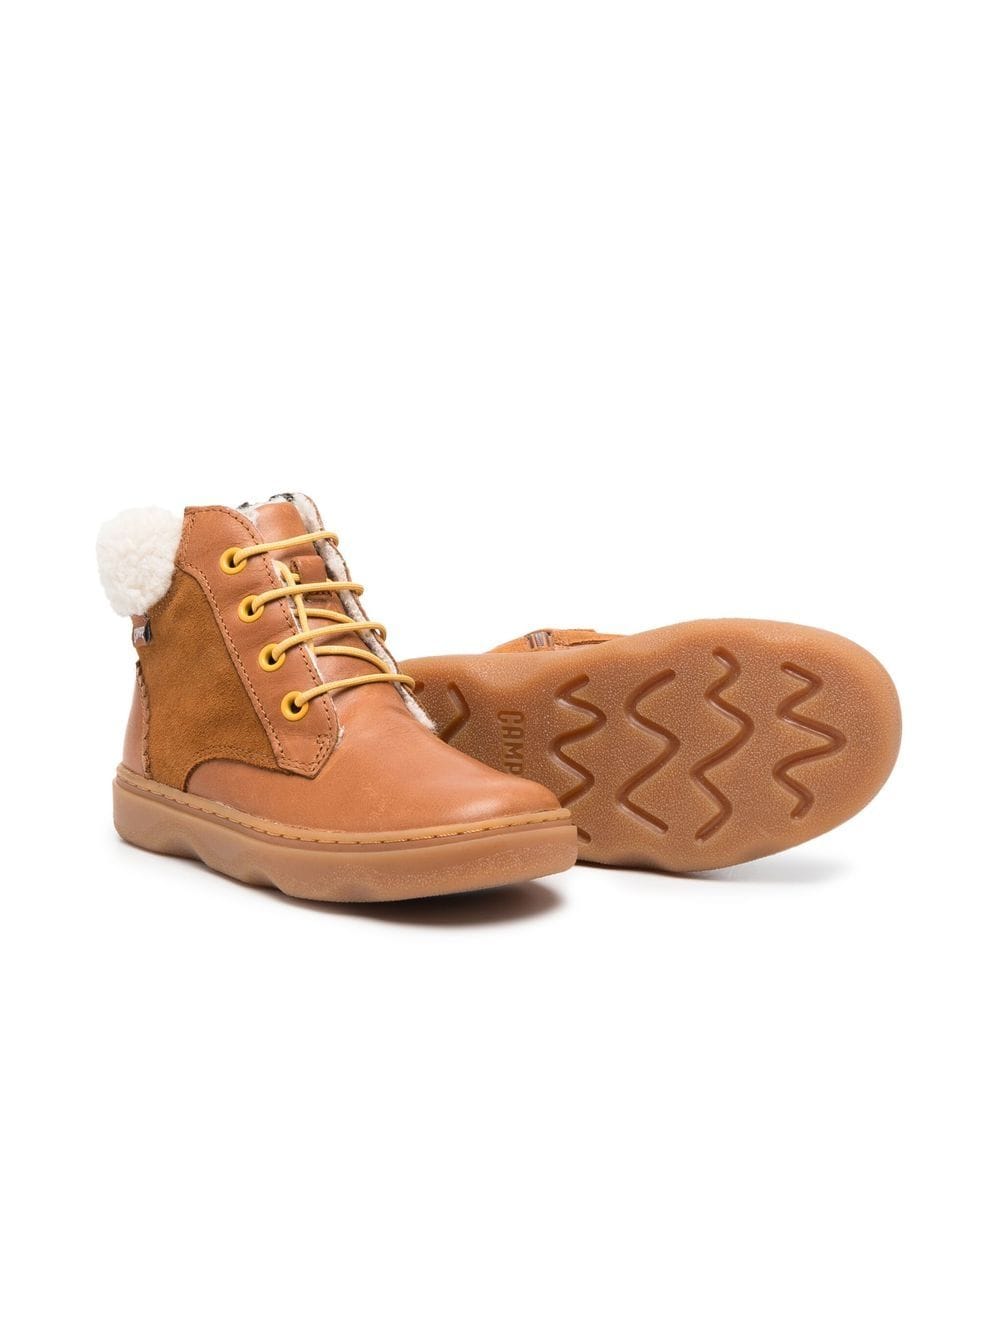 Image 2 of Camper Kids Kiddo faux-shearling lined boots